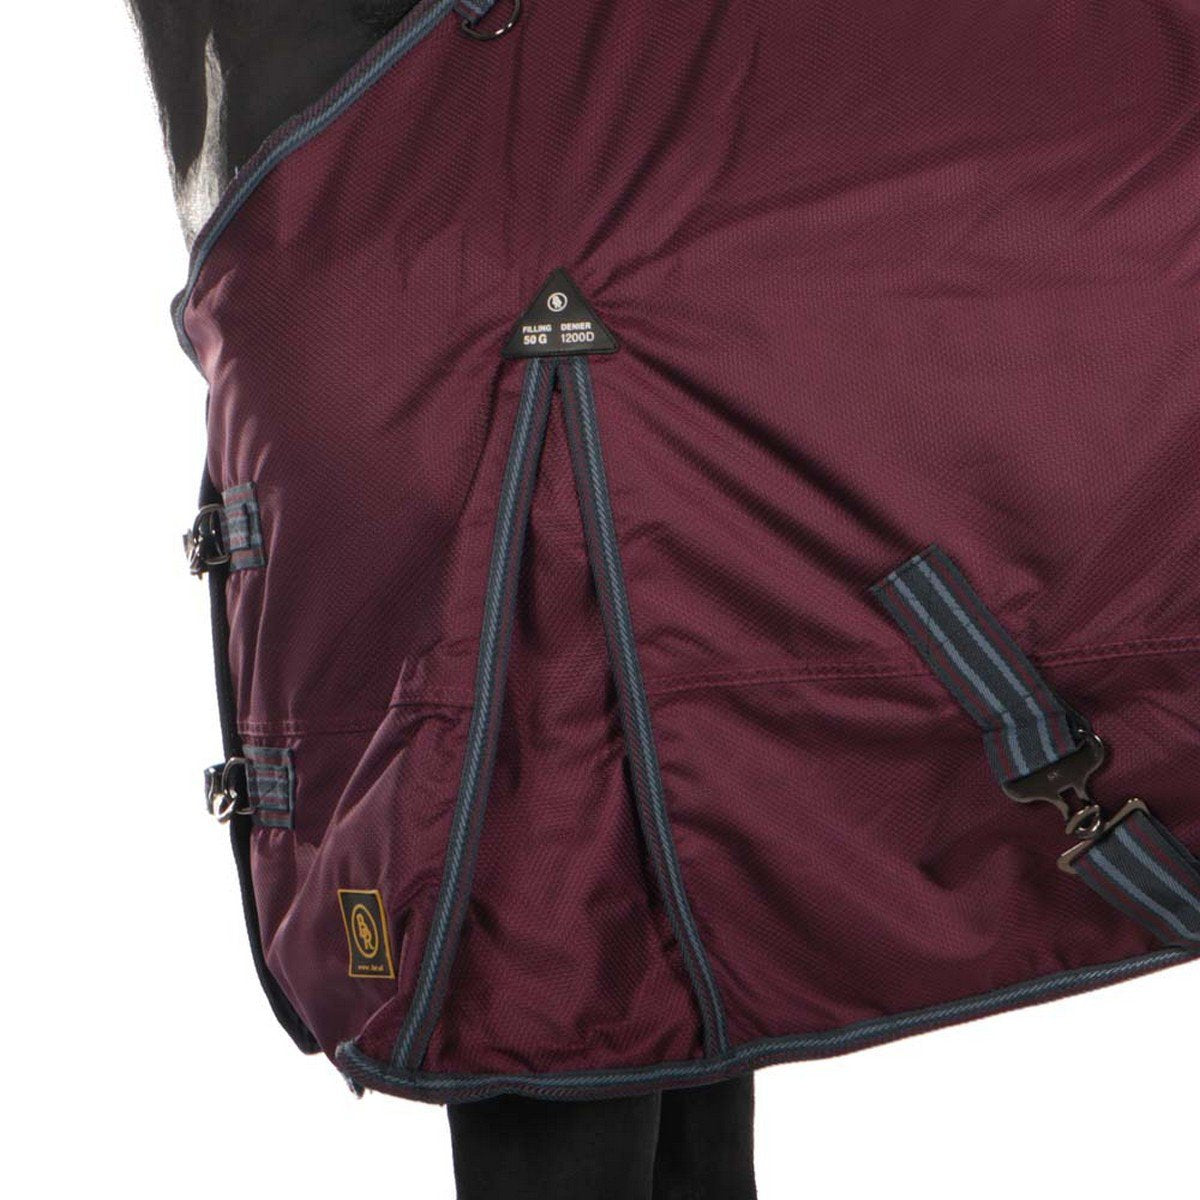 BR Thermo Layer Turnout 1200D 50g with Neck - Mauve Wine 205cm/81" - Limited Edition